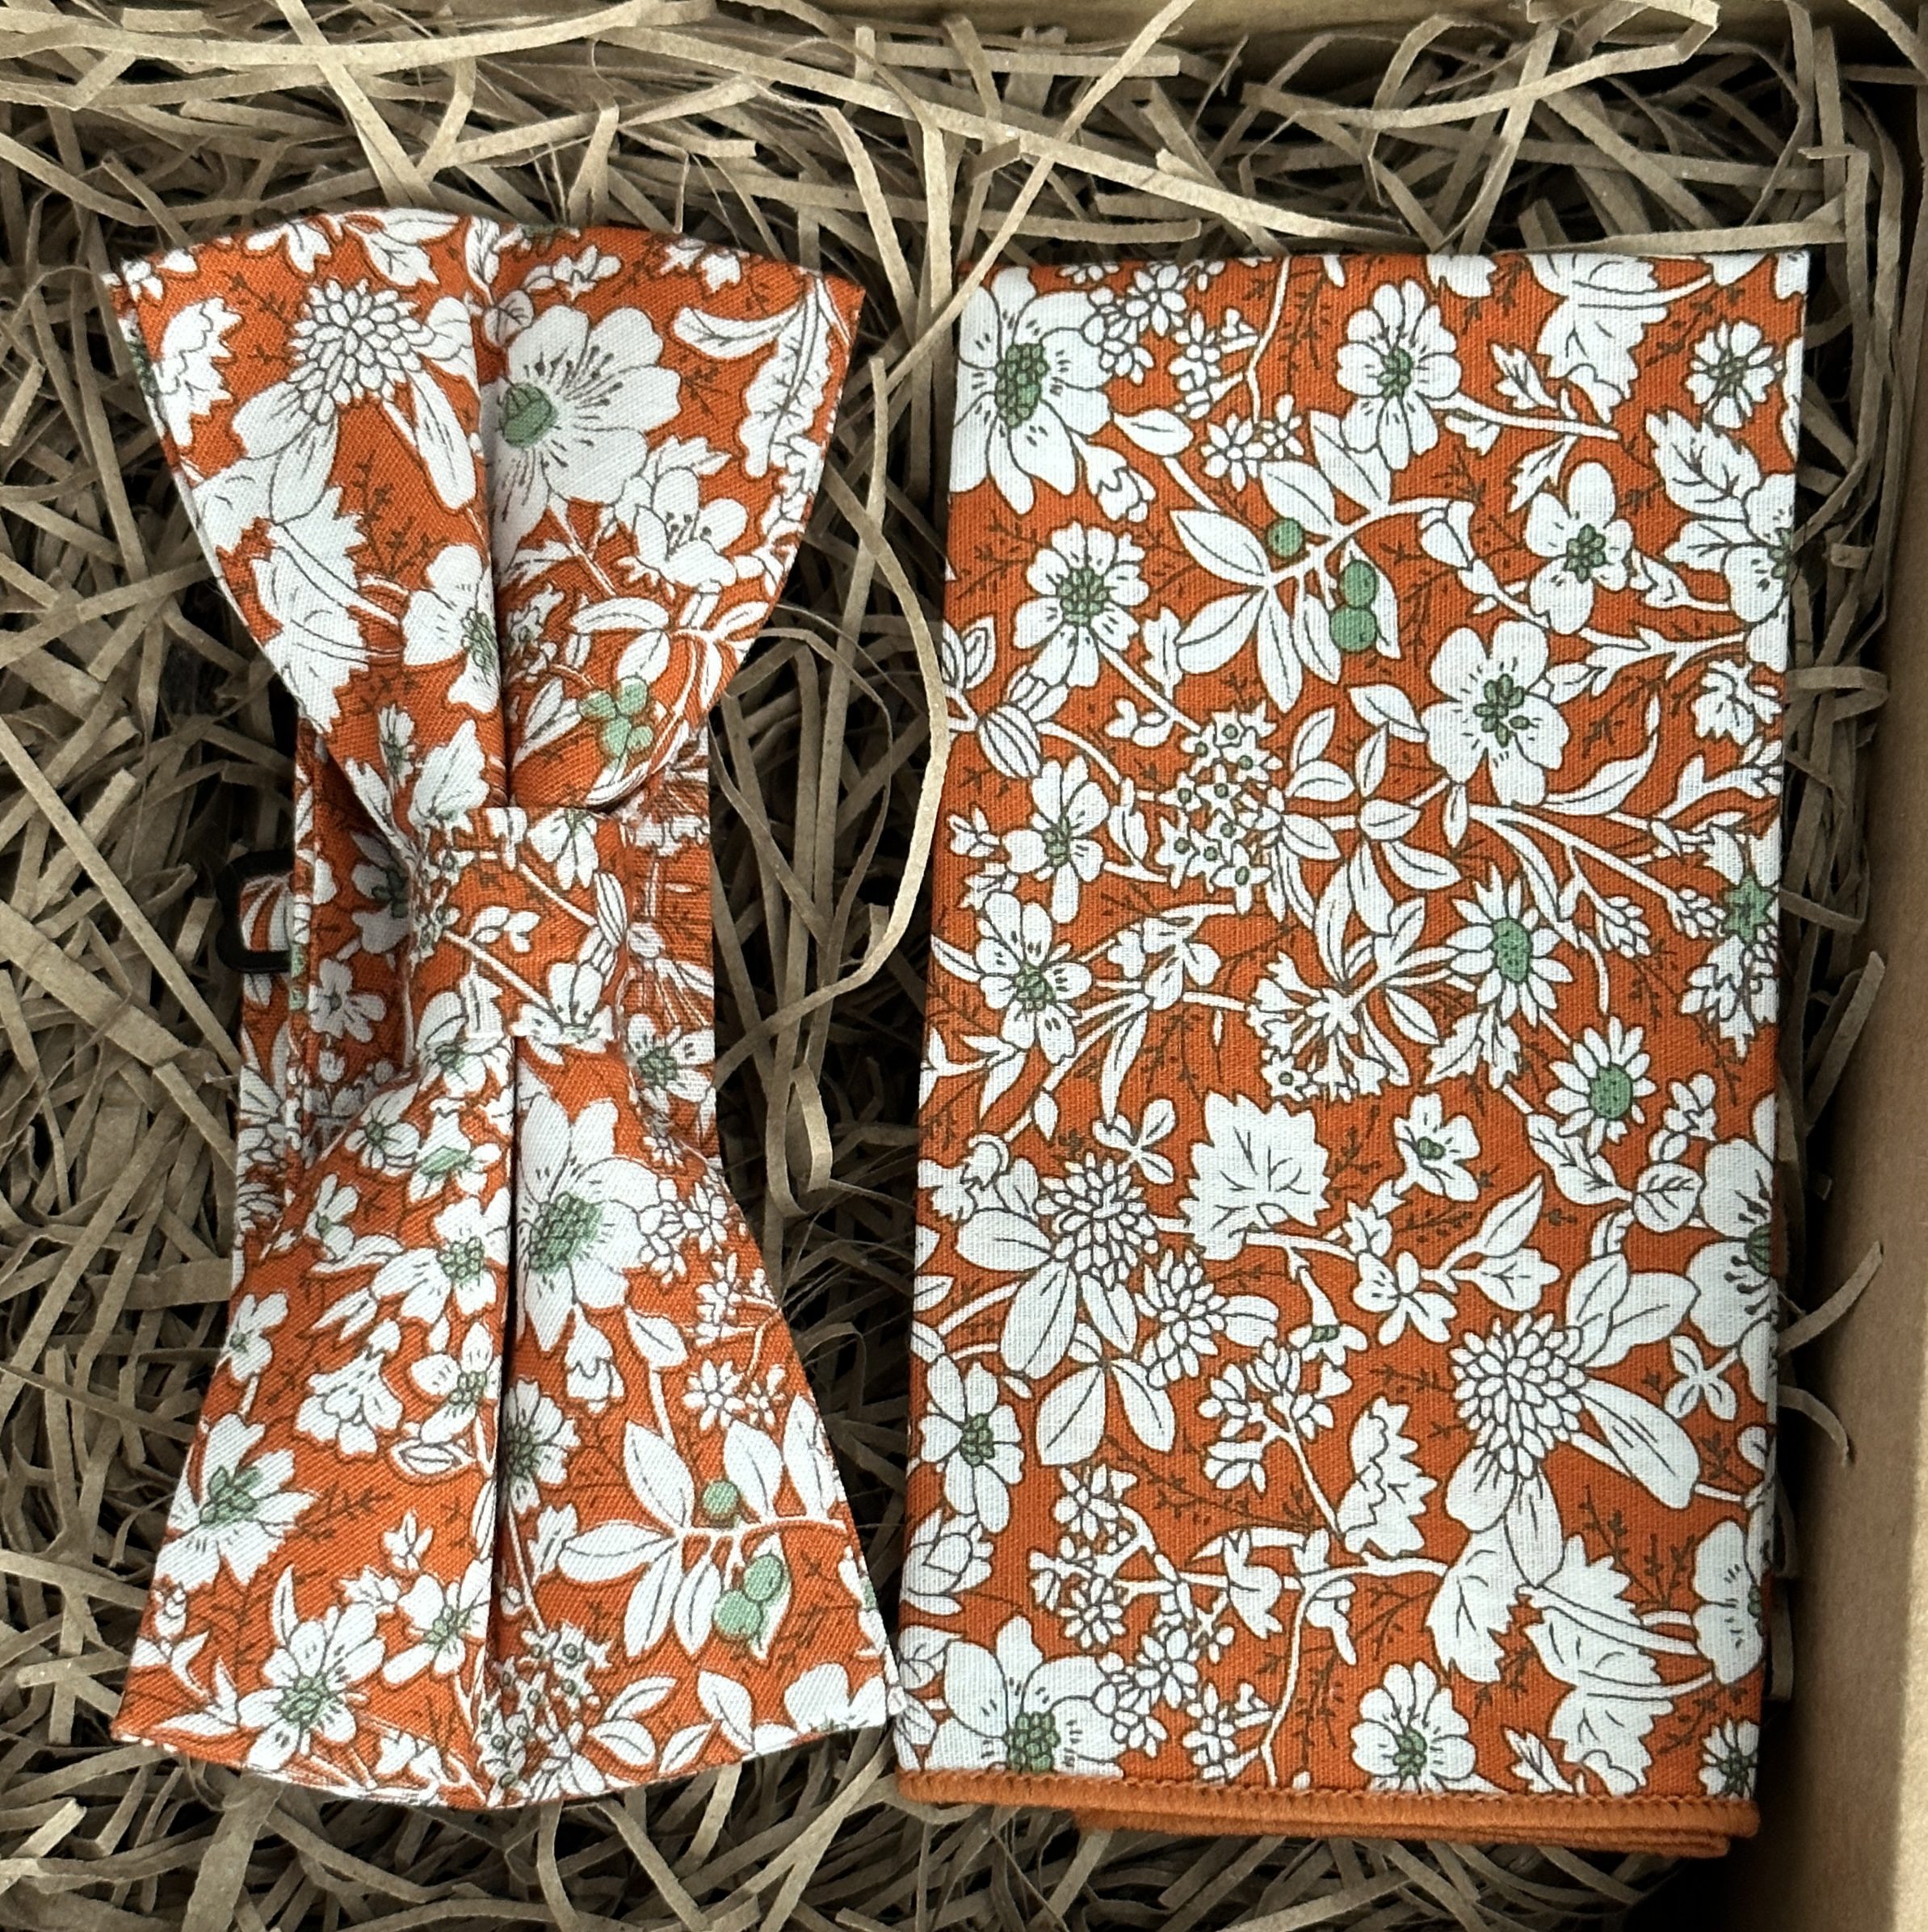 A photo of an orange floral bow tie and pocket square